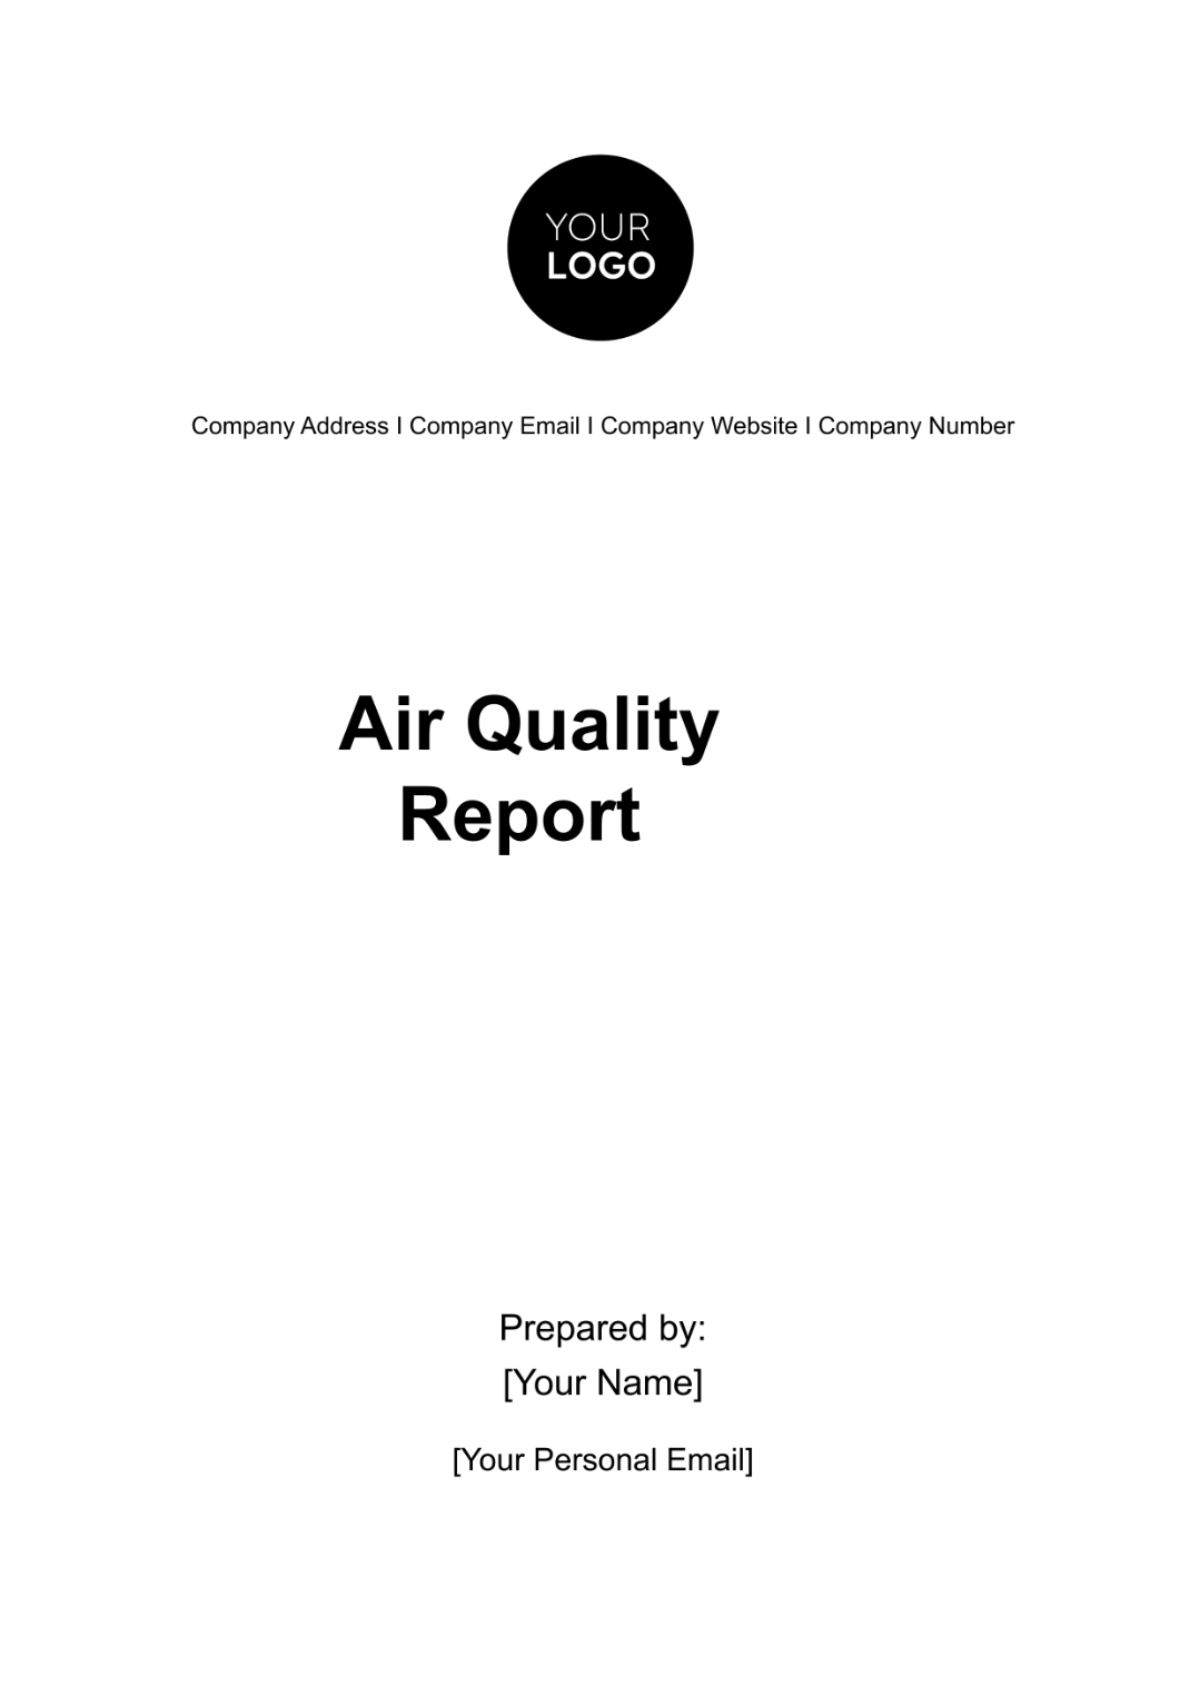 Free Air Quality Report HR Template